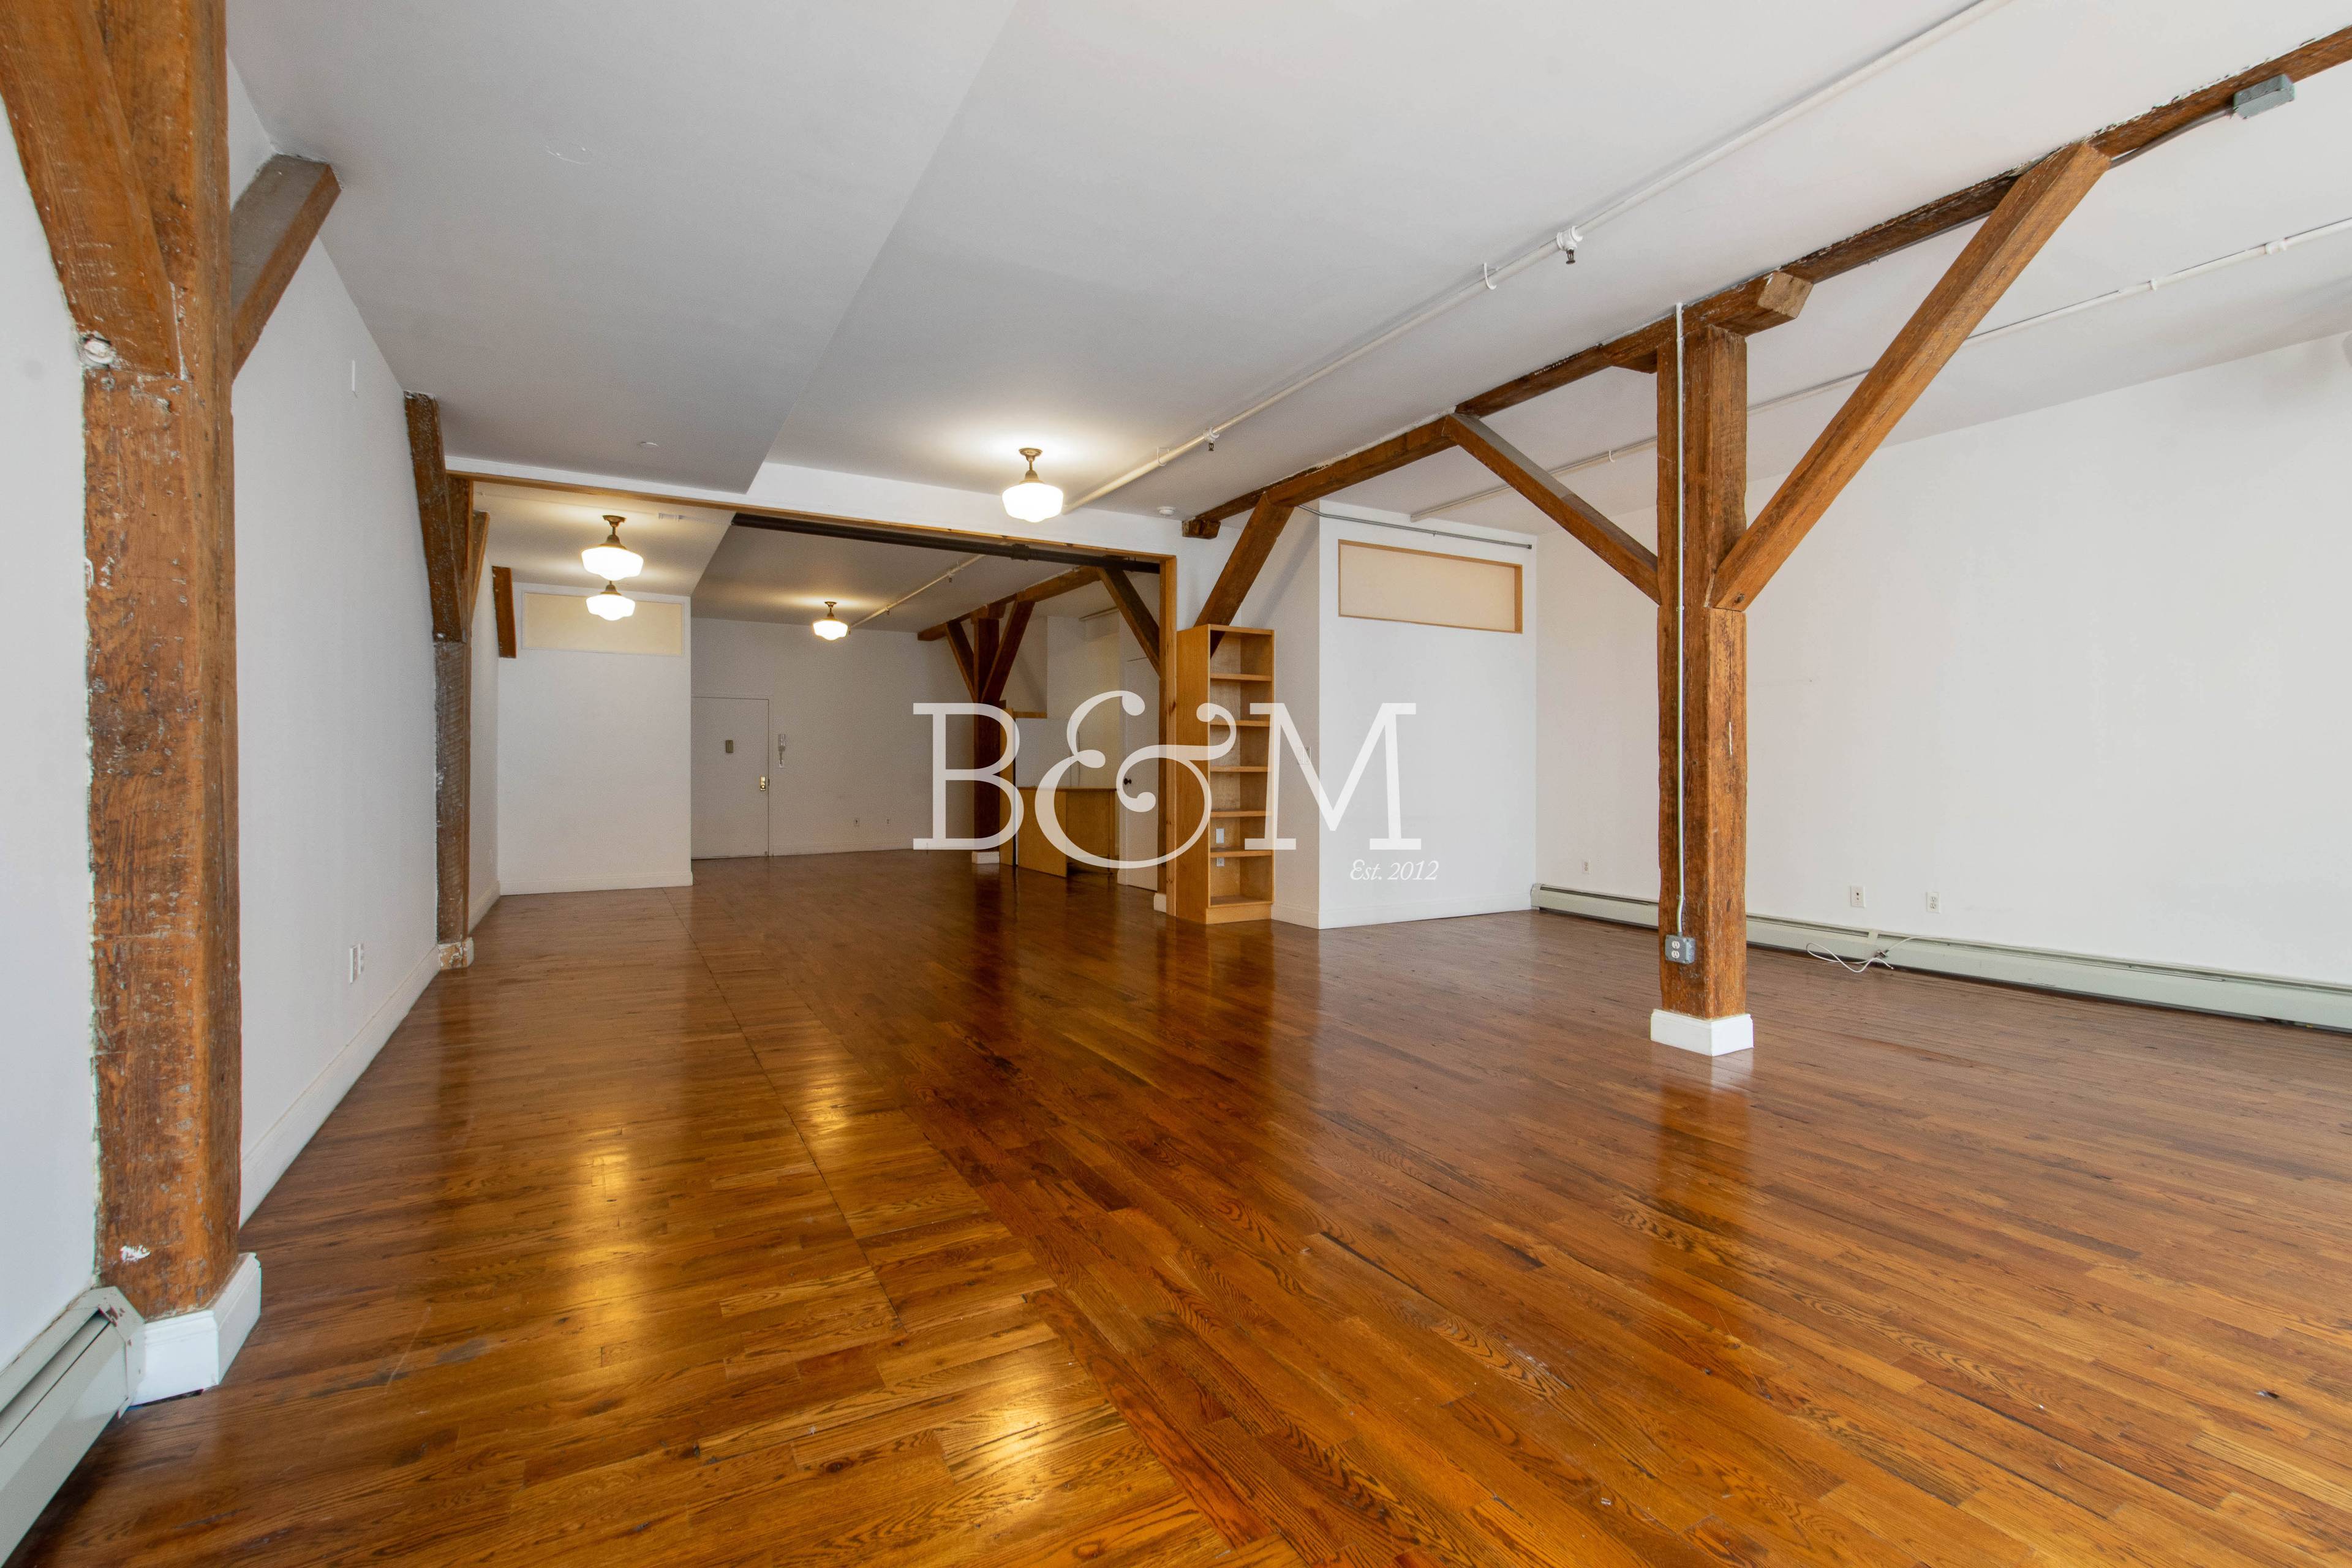 THE LOFT This beautiful and authentic elevatored Williamsburg loft is on the Second floor of a timeless brick building near the corner of North 3rd Street and Wythe Avenue.